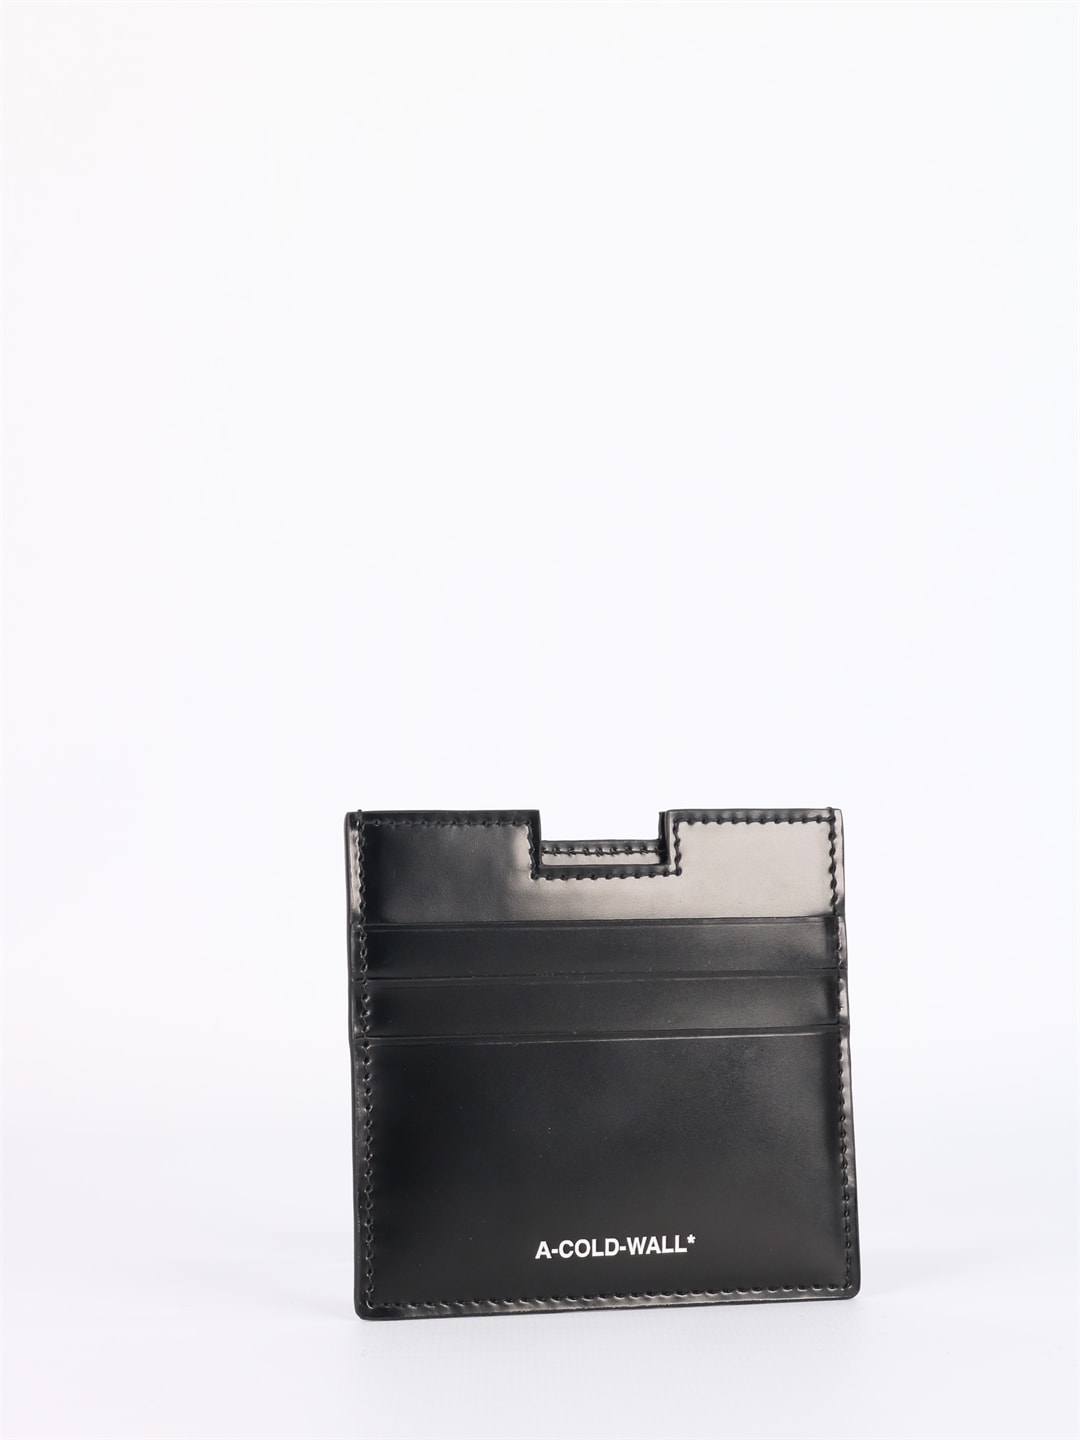 A-COLD-WALL Black Leather Card Holder